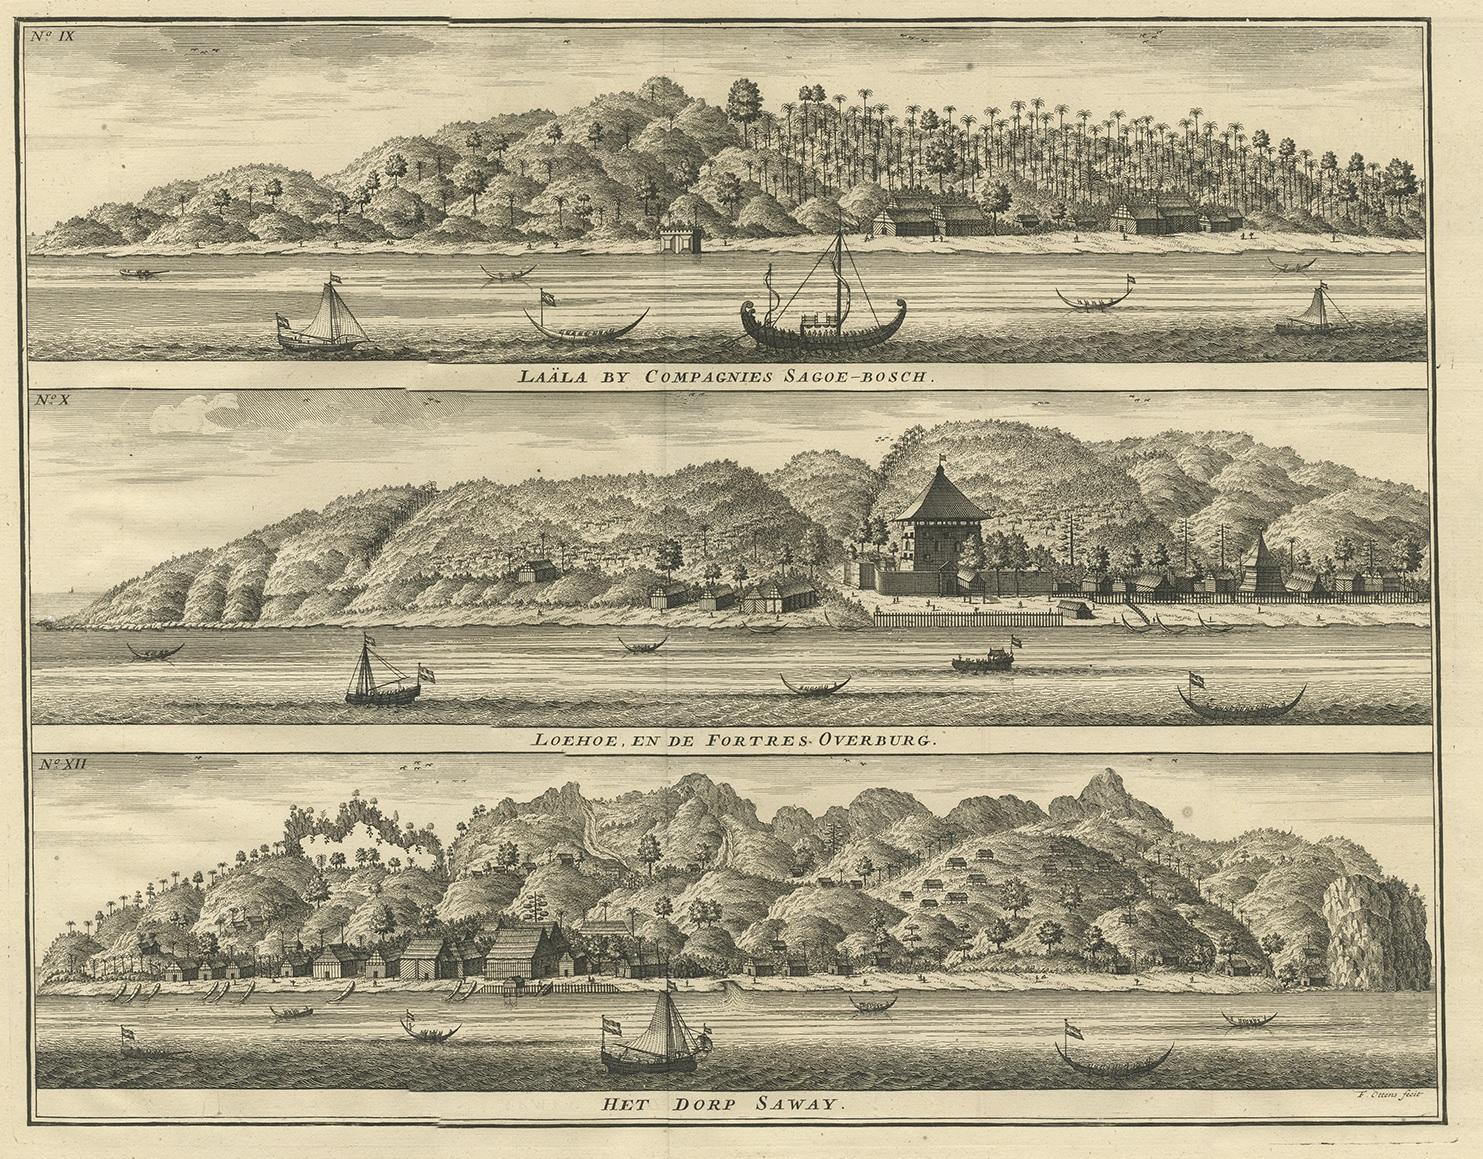 Antique print titled 'Laala by Compagnies Sagoe-Bosch, Loehoe en de Fortres Overburg, het dorp Saway'. This print shows views of Laala on the peninsula Hoamoal, Fort Overburg near Luhu, and the village Saway. These places are all on the Indonesian